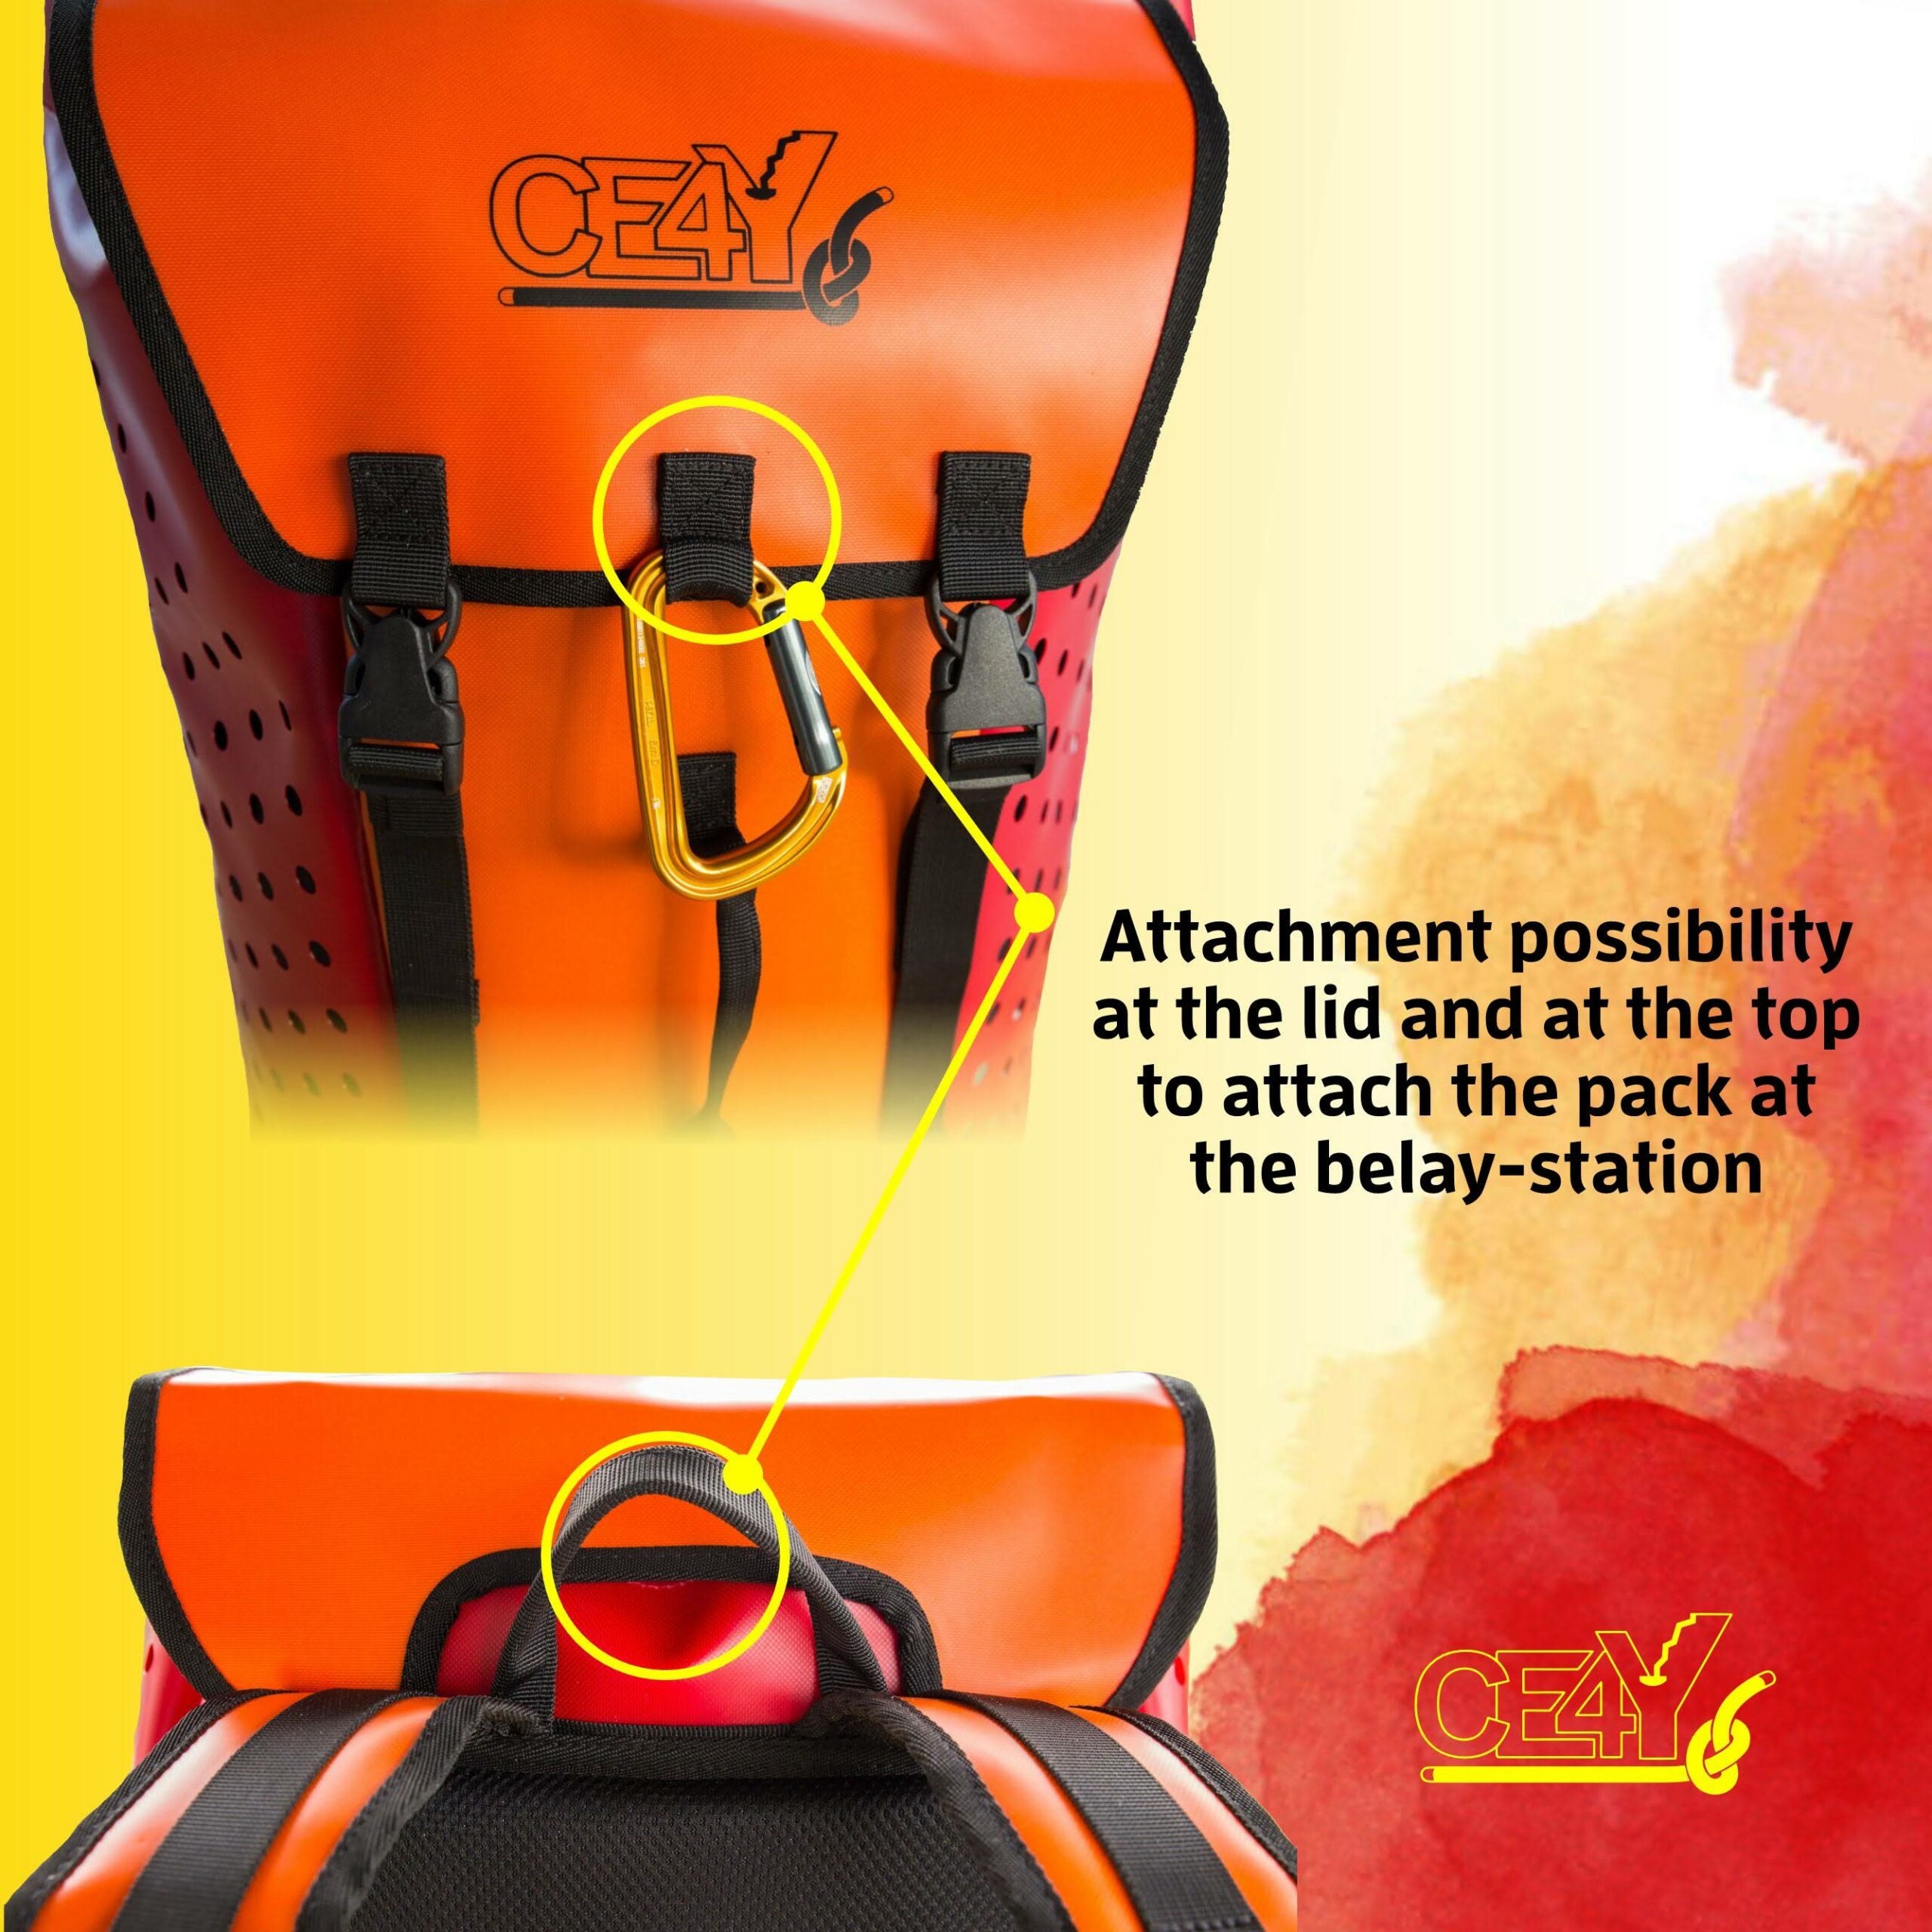 SPEEDY 45L Canyoning Pack